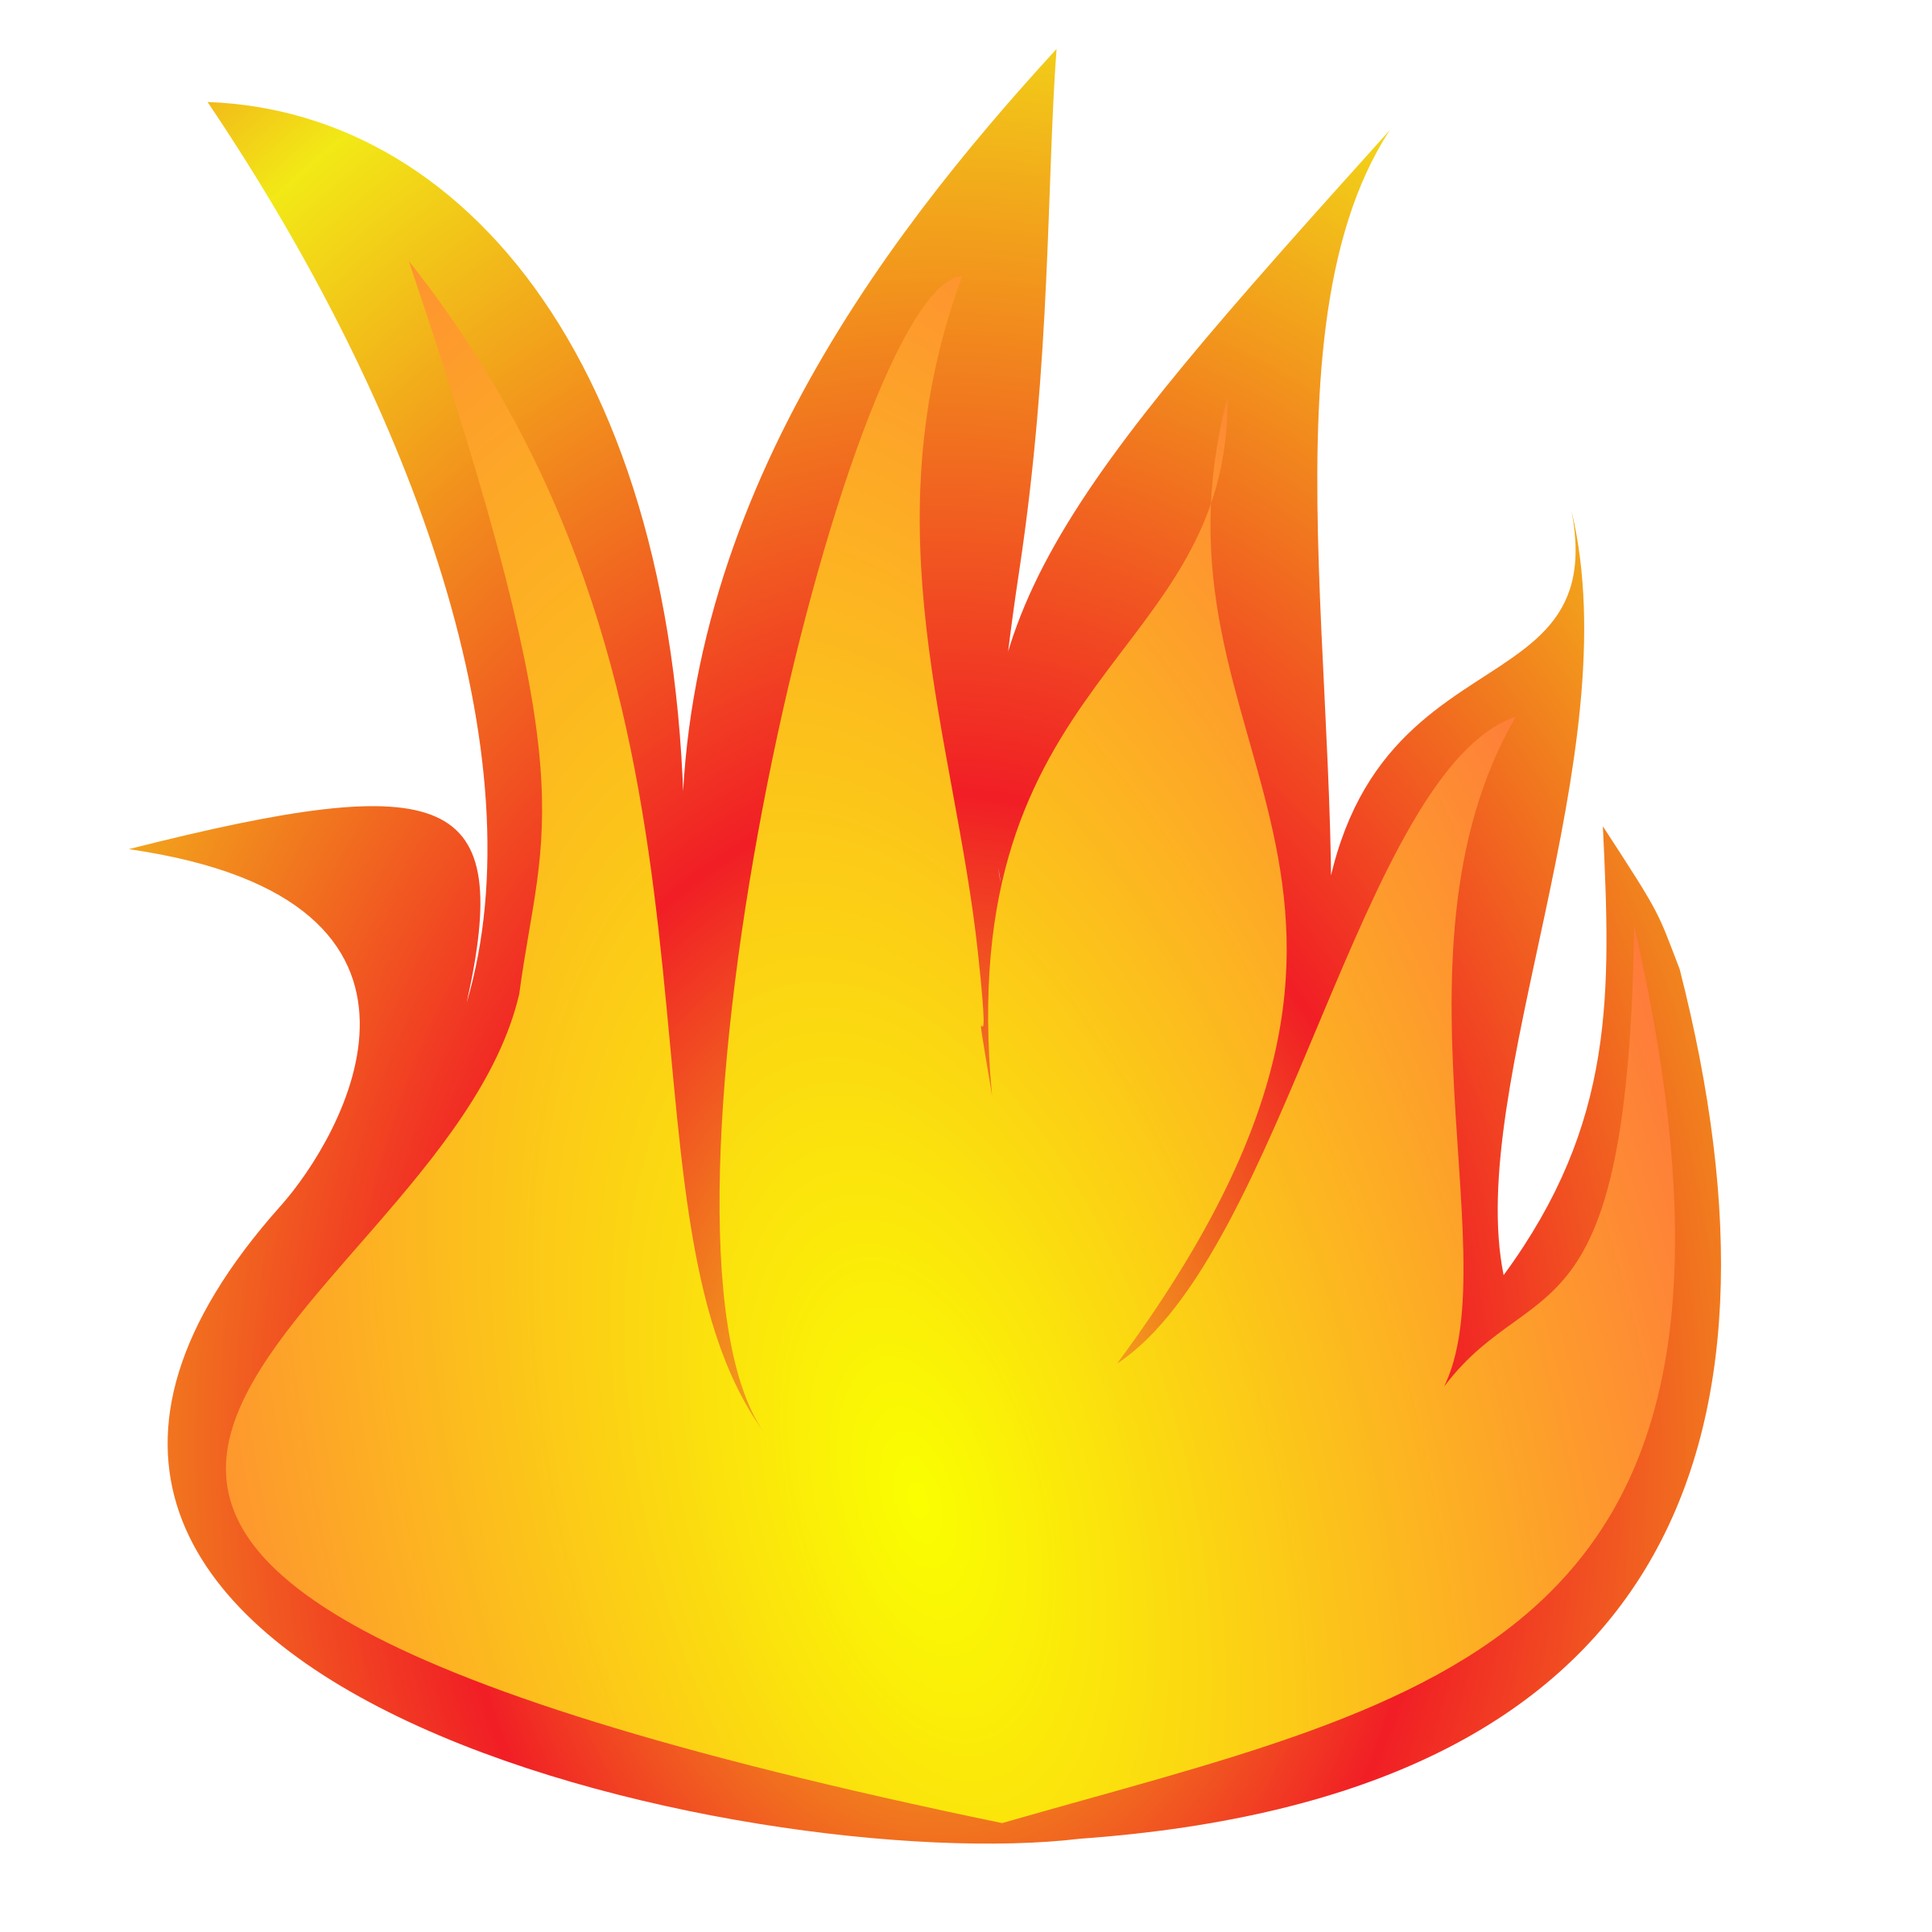 Flame clipart #8, Download drawings